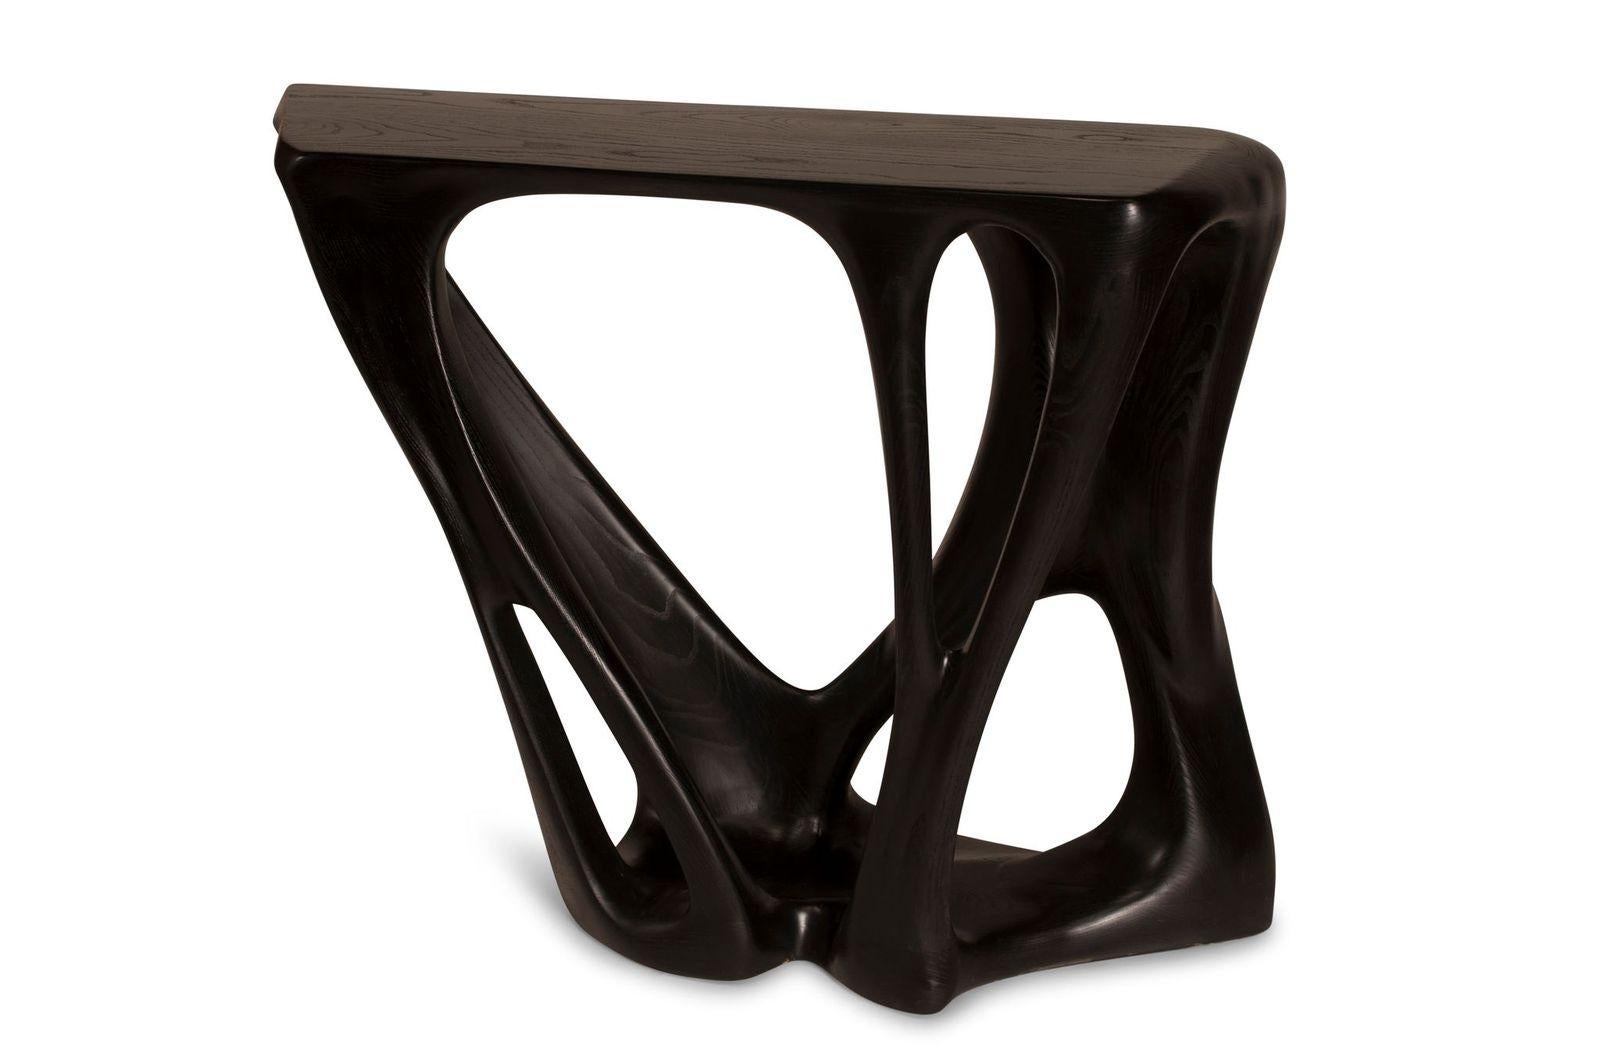 Contemporary Amorph Petra console table in Ebony stain on Ash wood  For Sale